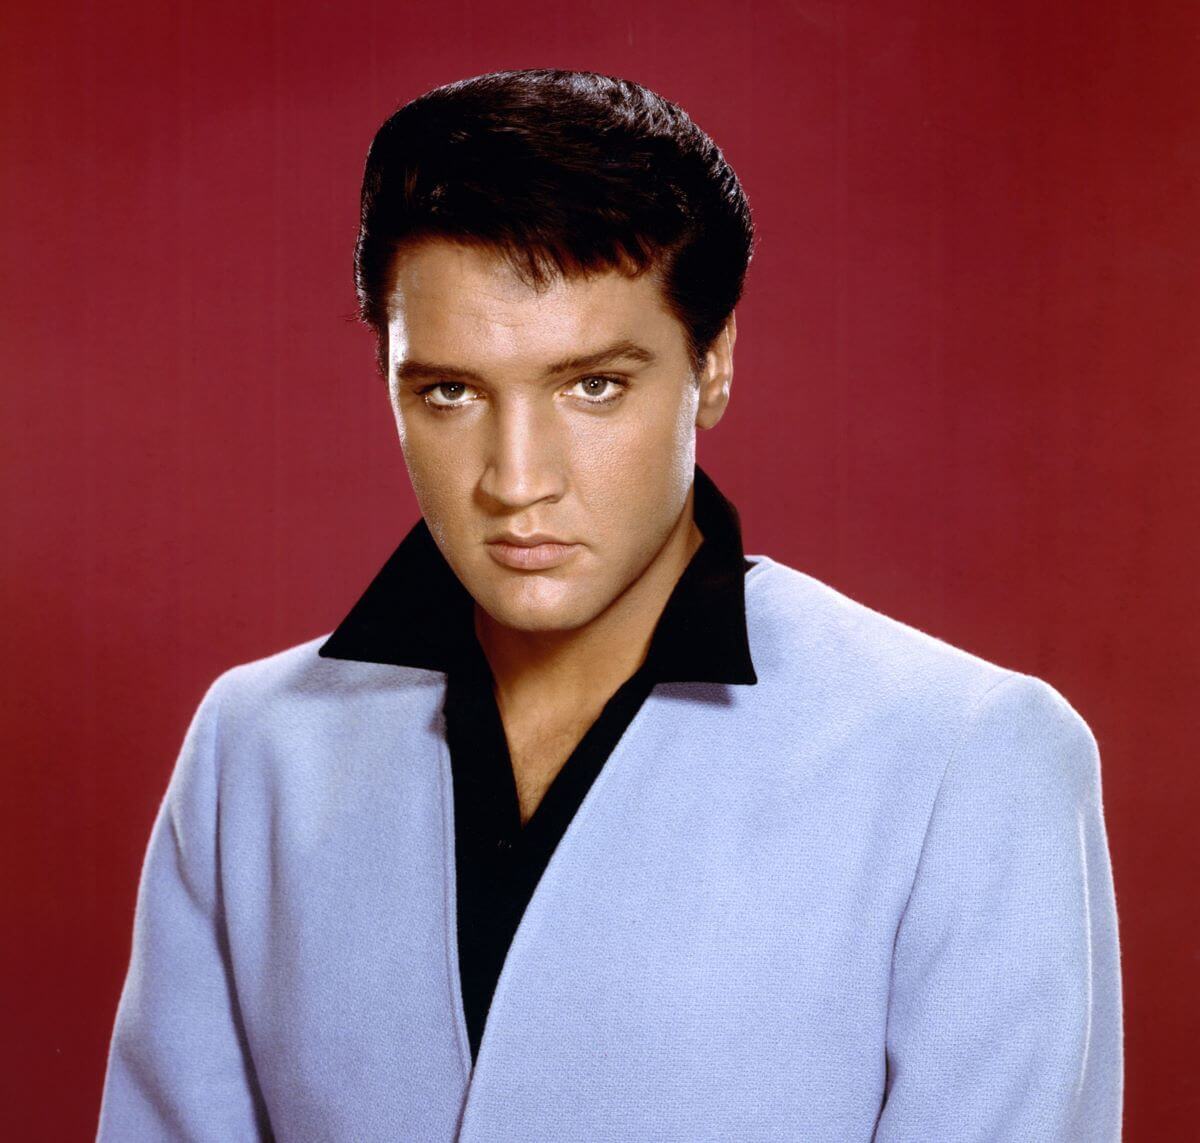 Elvis wears a blue suit and poses in front of a red background.